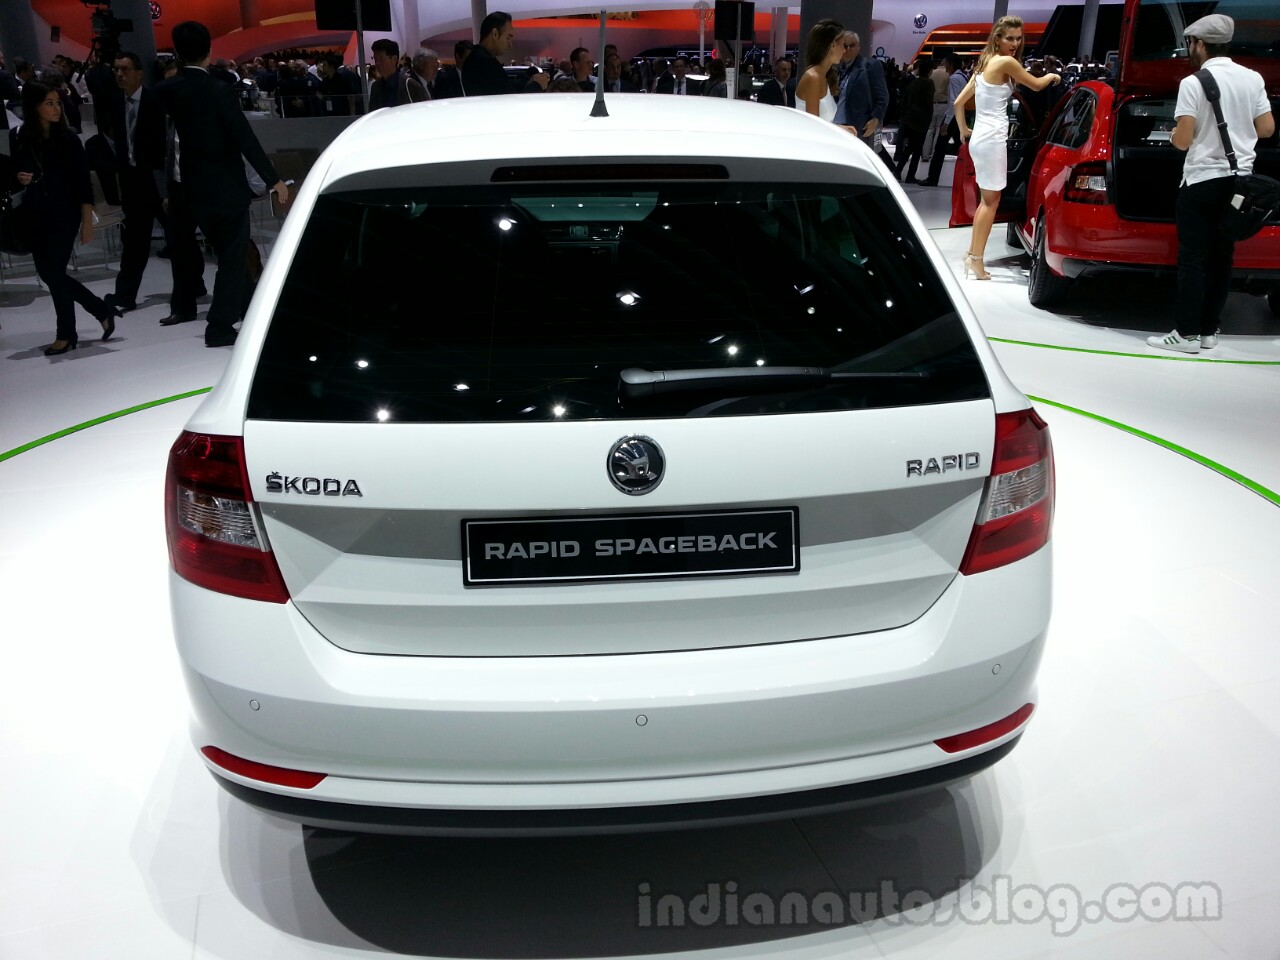 Frankfurt Live - Skoda Rapid Spaceback has a lot of space and a